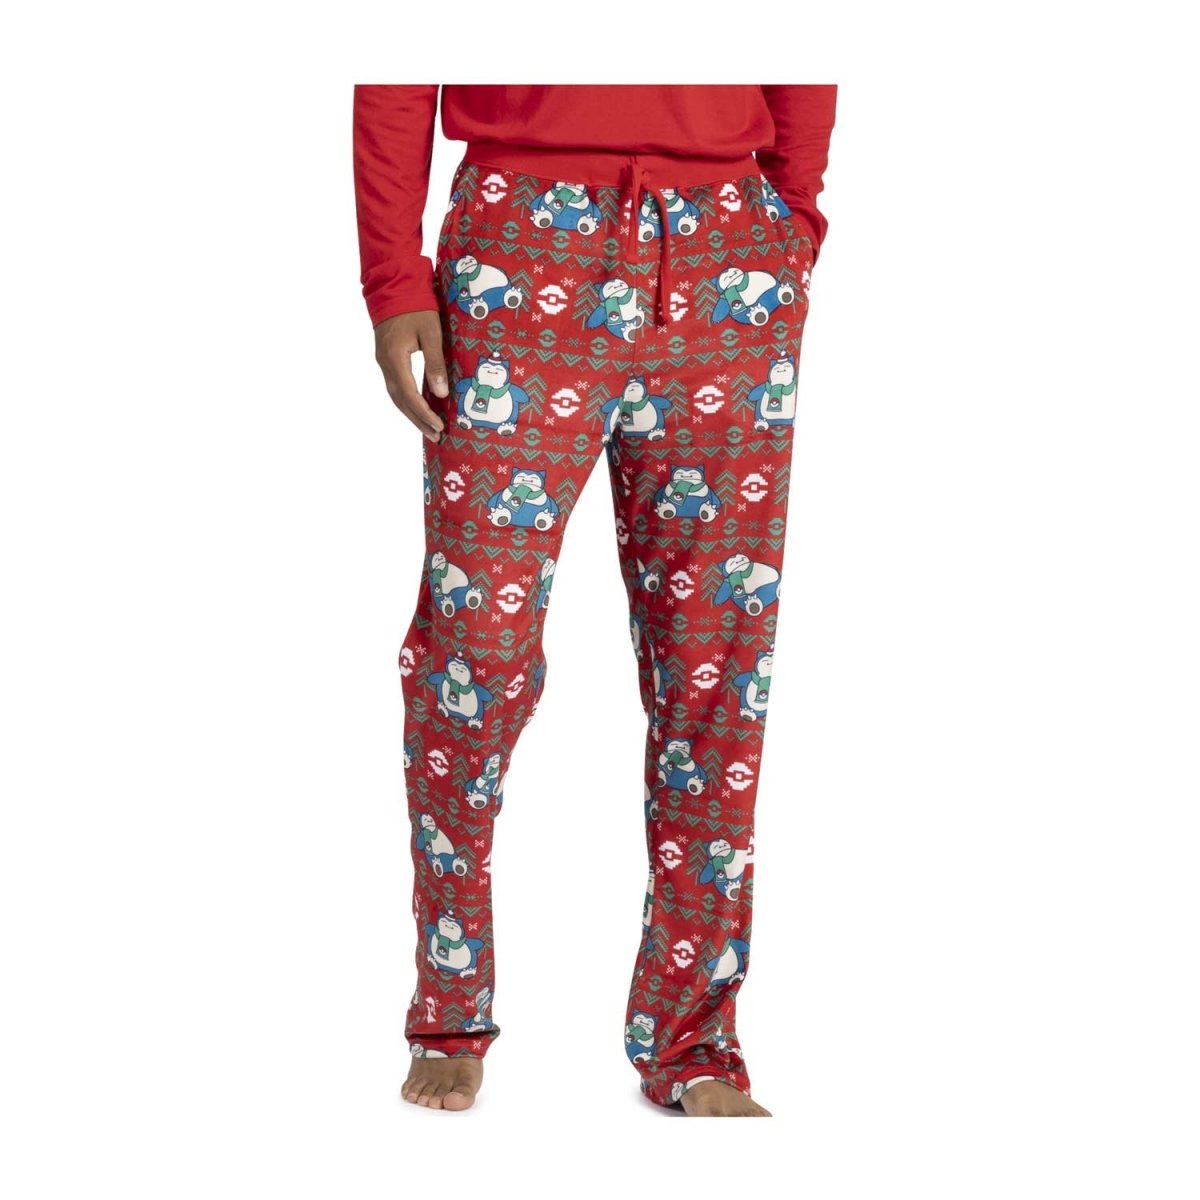 Snorlax Restful in Red Lounge Pants - Men